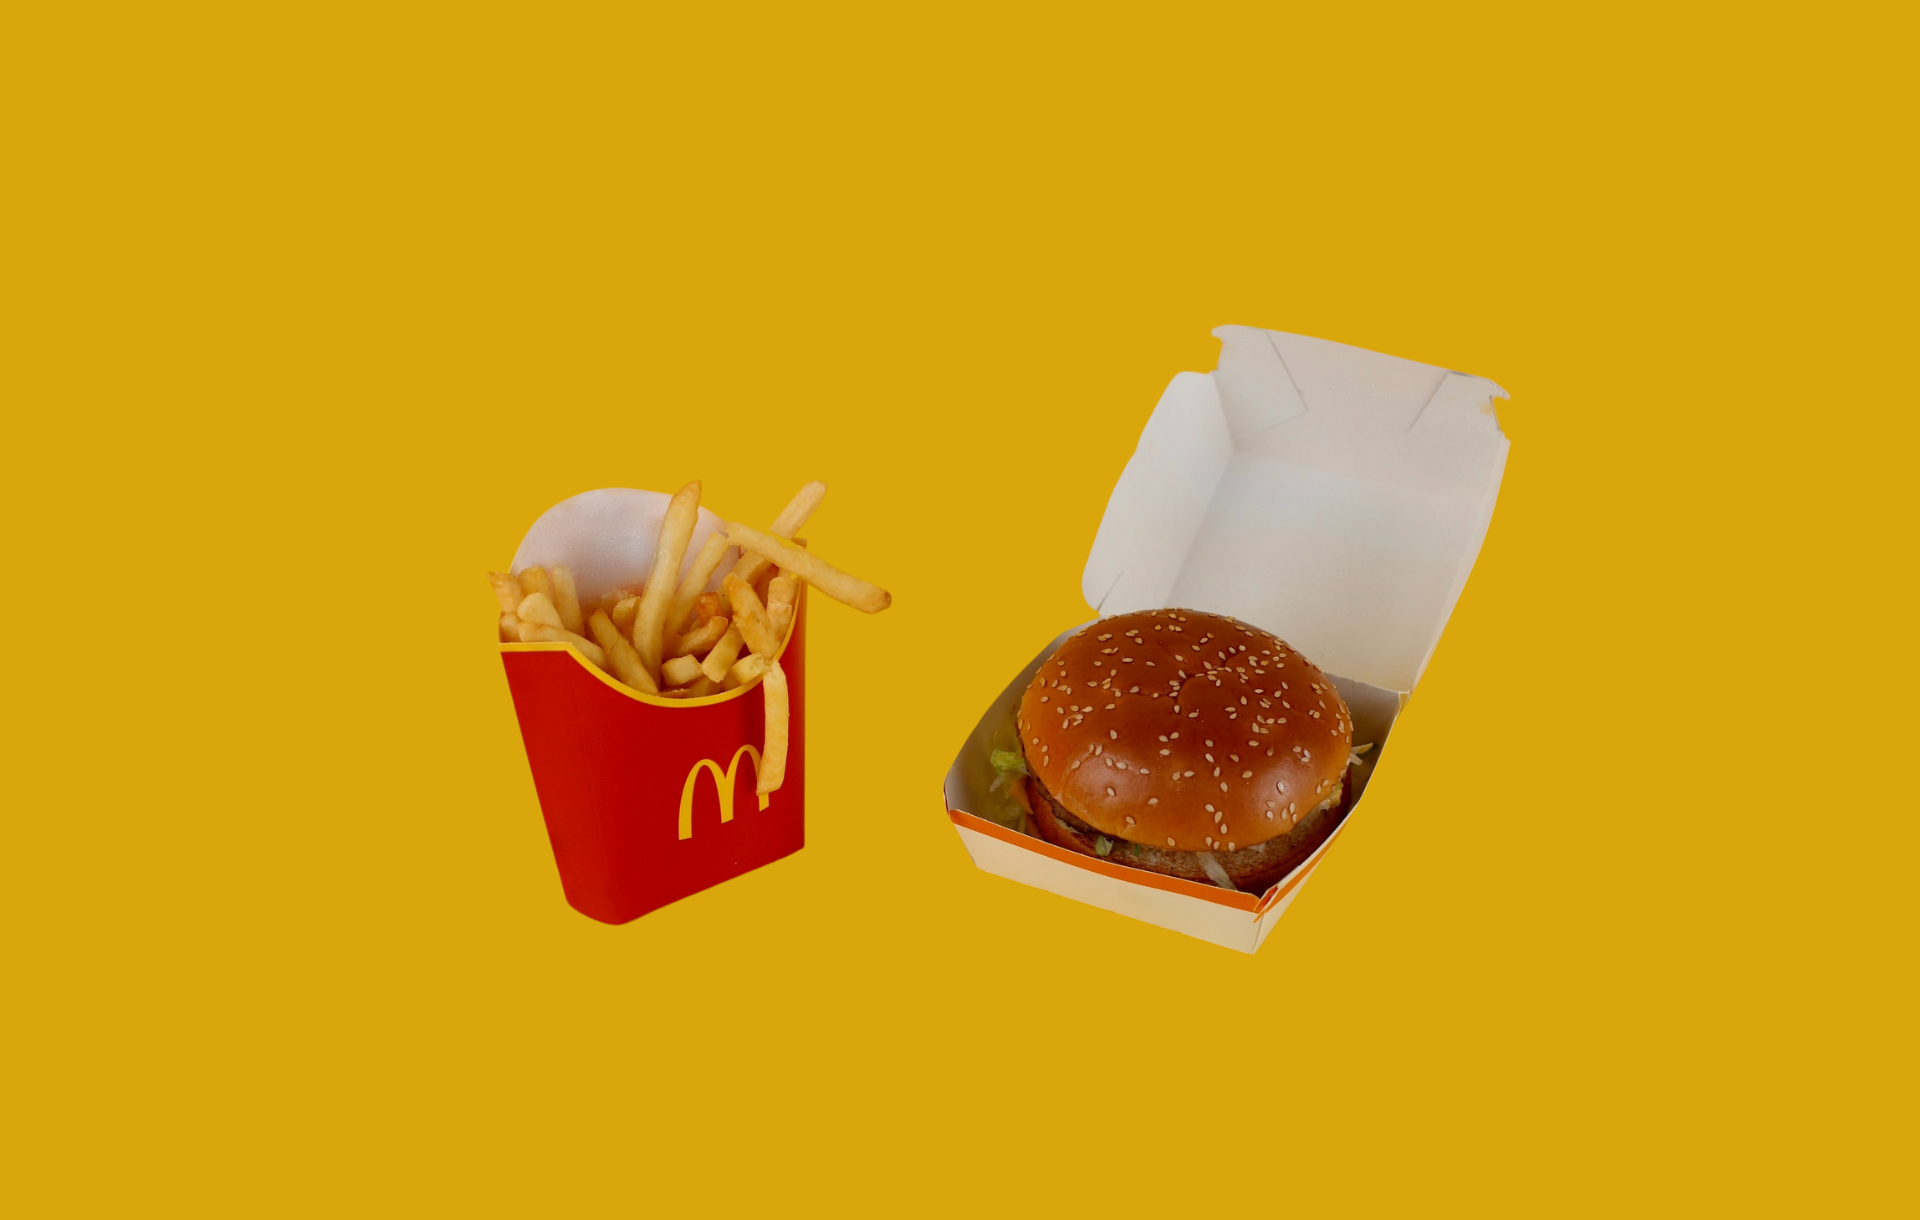 McDonald’s trying to be a luxury brand Capitalism, minimalism, decadence and French fries.